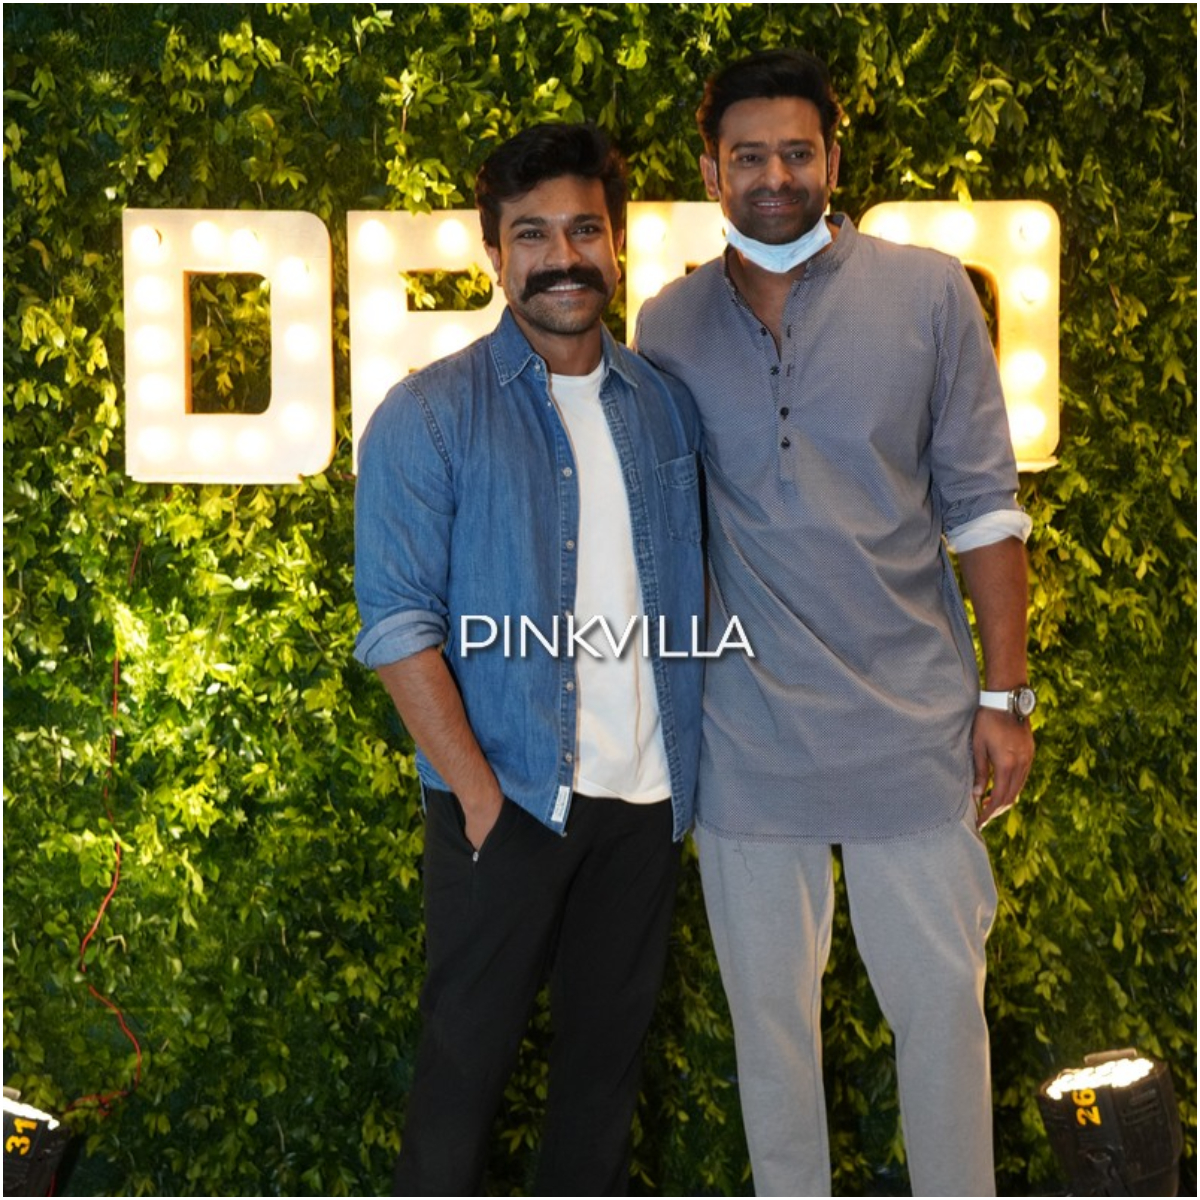 Baahubali actor Prabhas steps out for an audio launch in style (in pics)